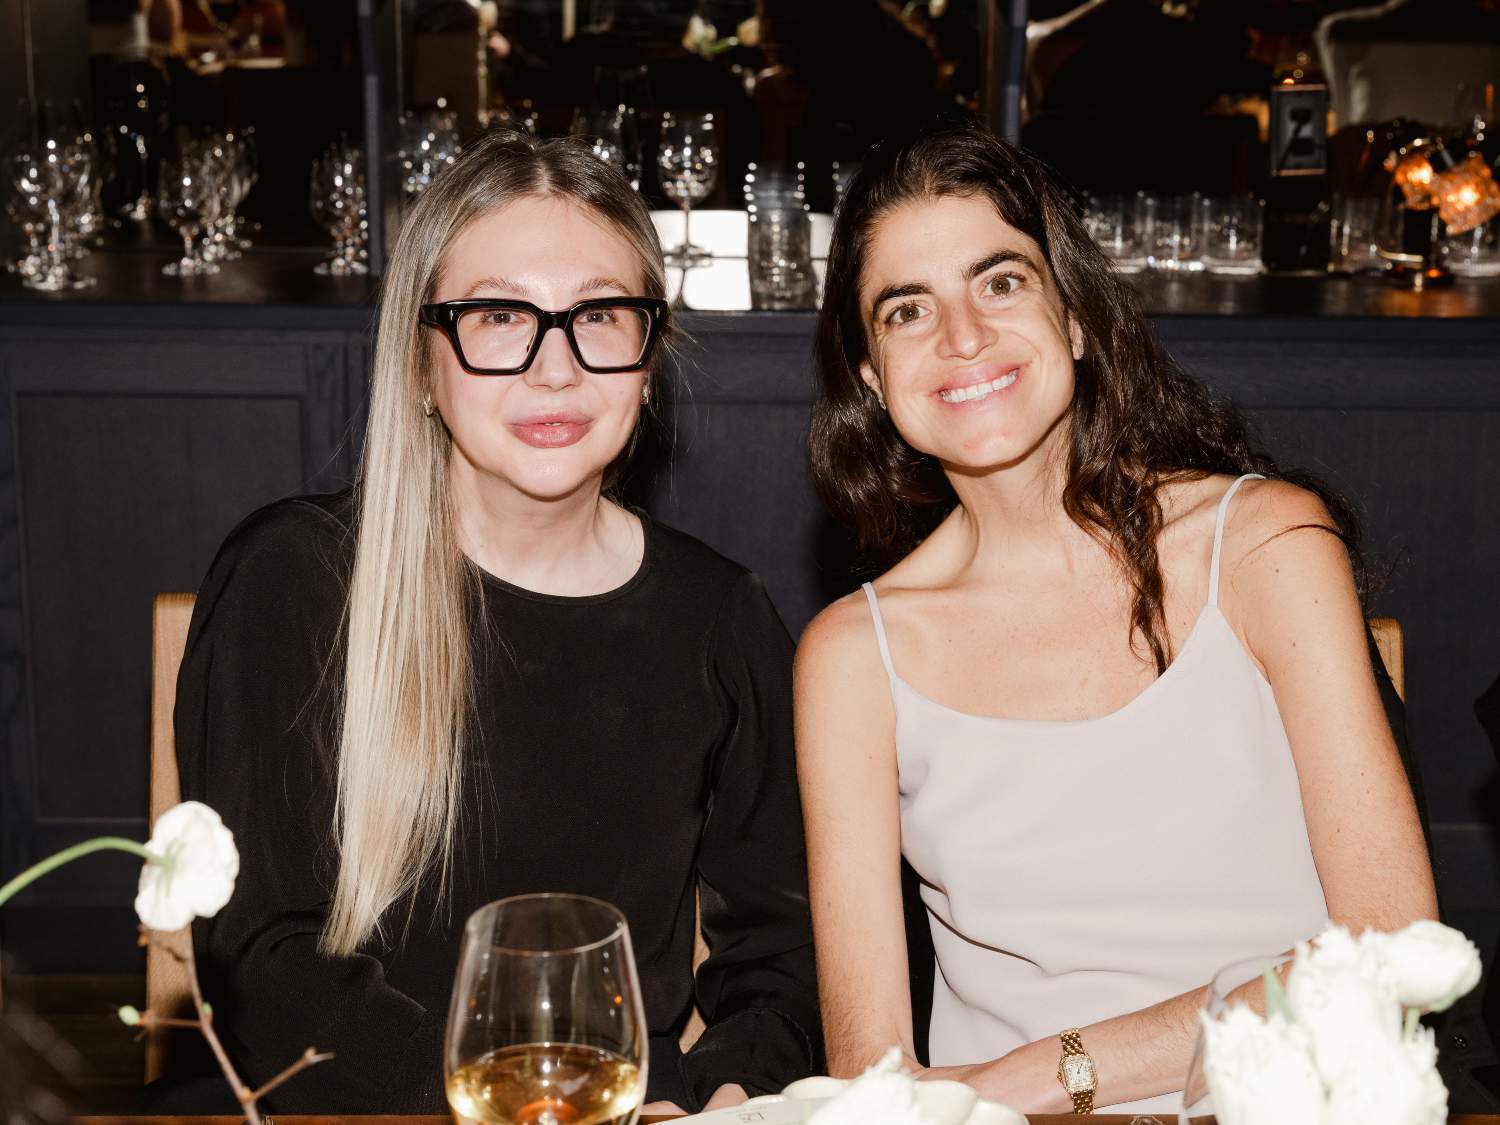 Bienvenue, Rue Sophie! Inside The Brand’s Chic NYC Launch Dinner